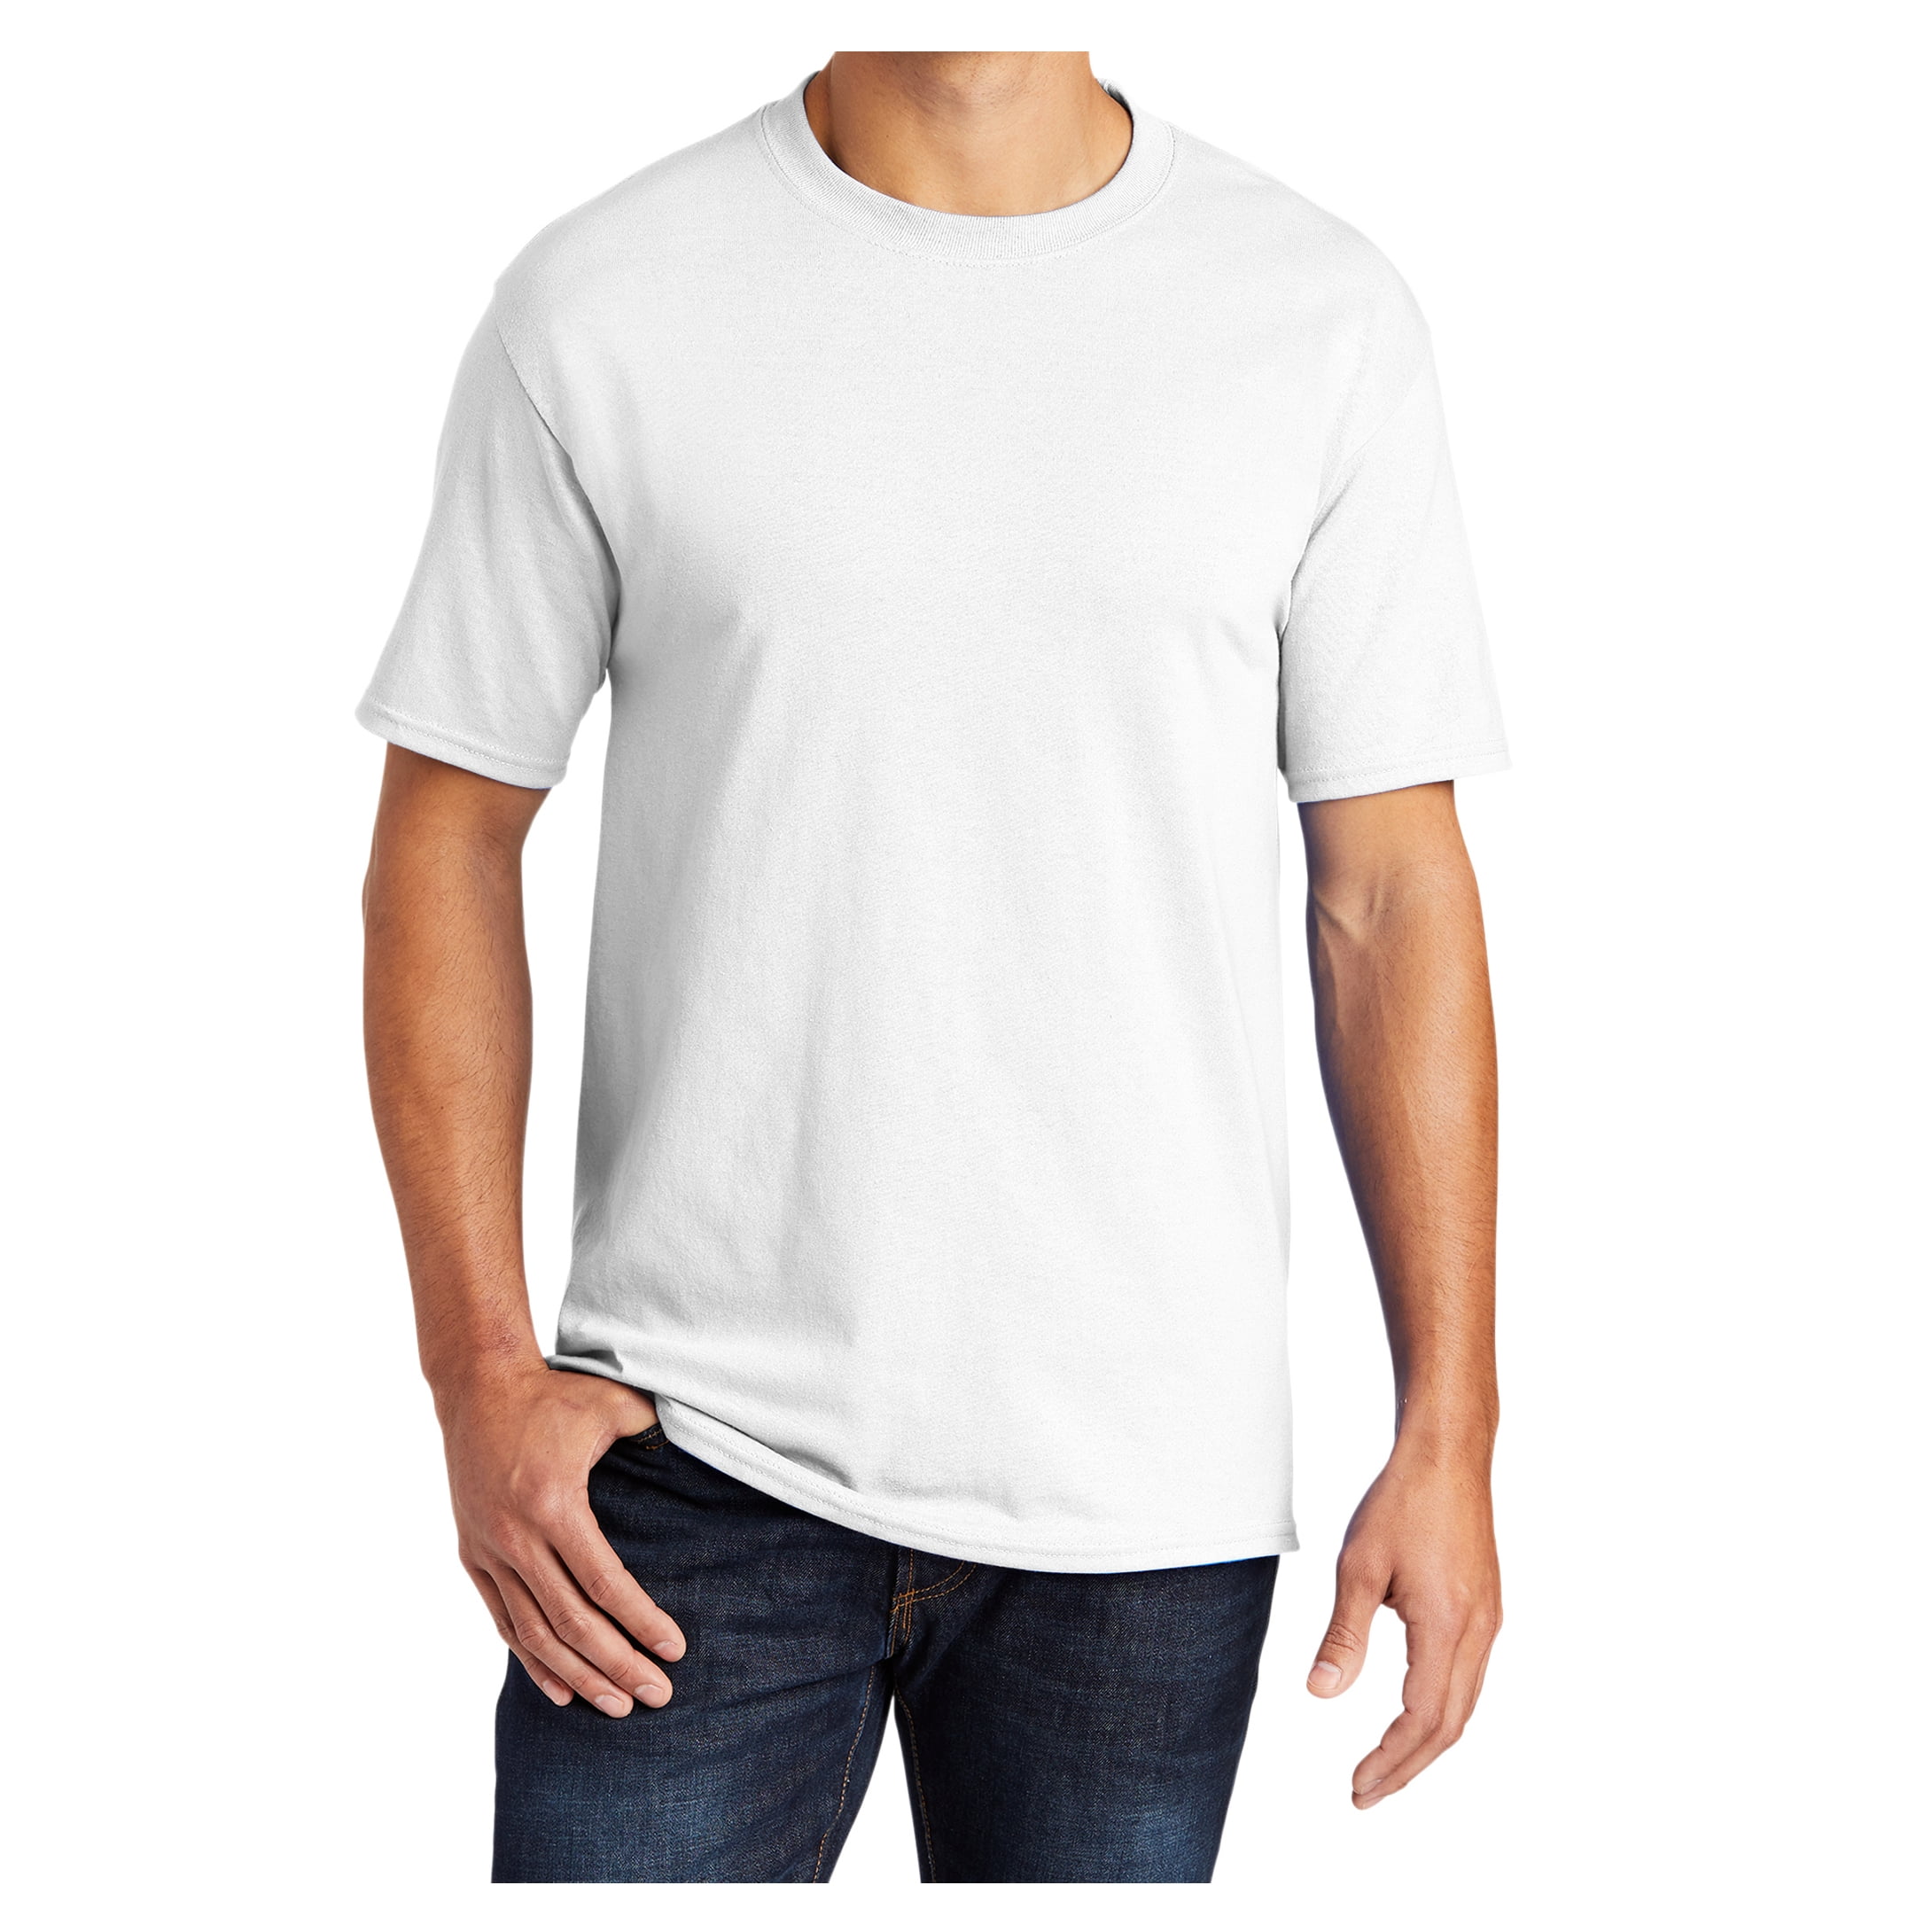 Buy HERE&NOW Men White Pure Cotton T Shirt - Tshirts for Men 18239082